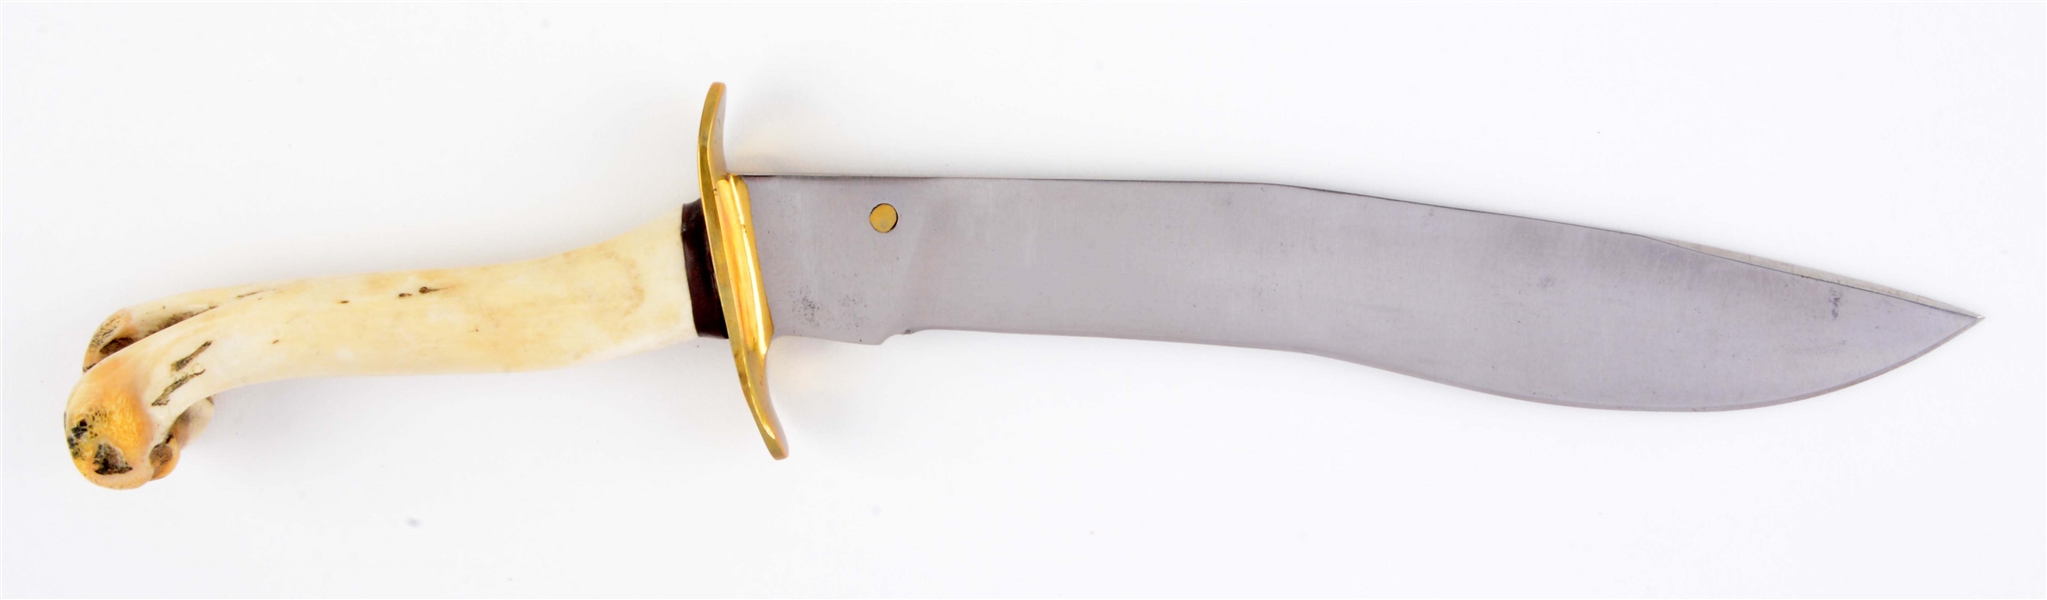 COOPER FIGHTER WITH BONE HANDLE AND CURVED BLADE.